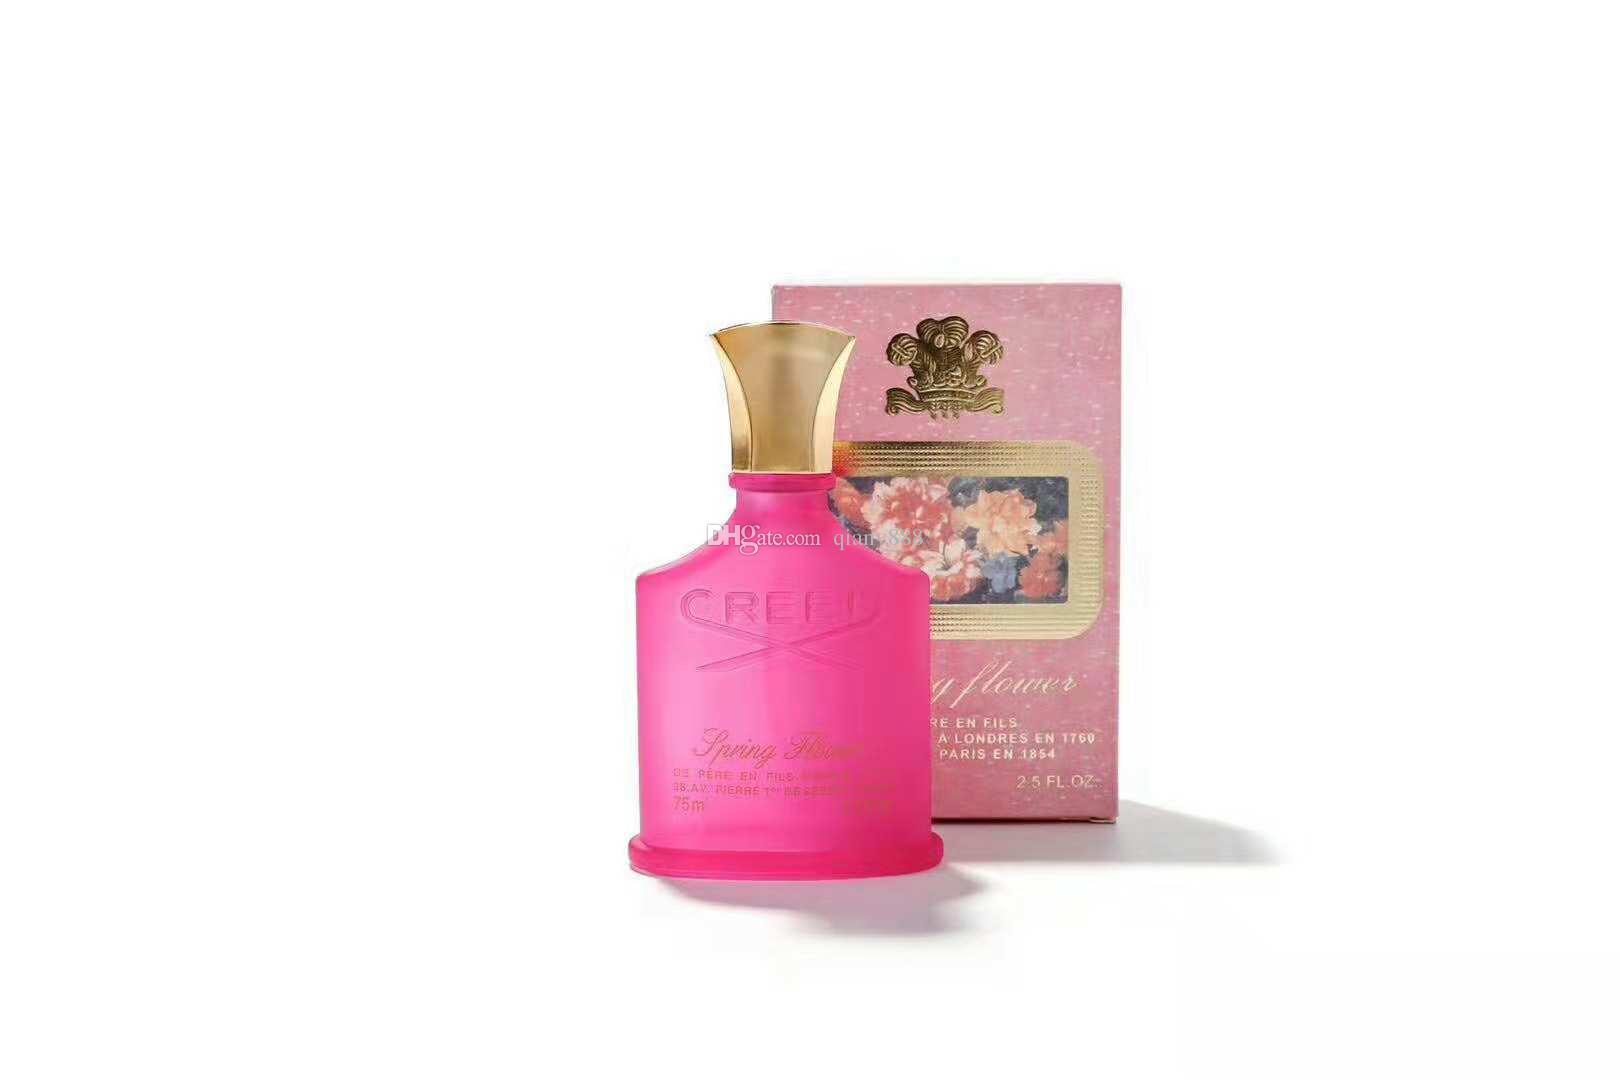 2019 Hot buy Christmas High Quality Pink Creed Spring Flower Fragrance Eau de Toilette 75ml Free Shopping